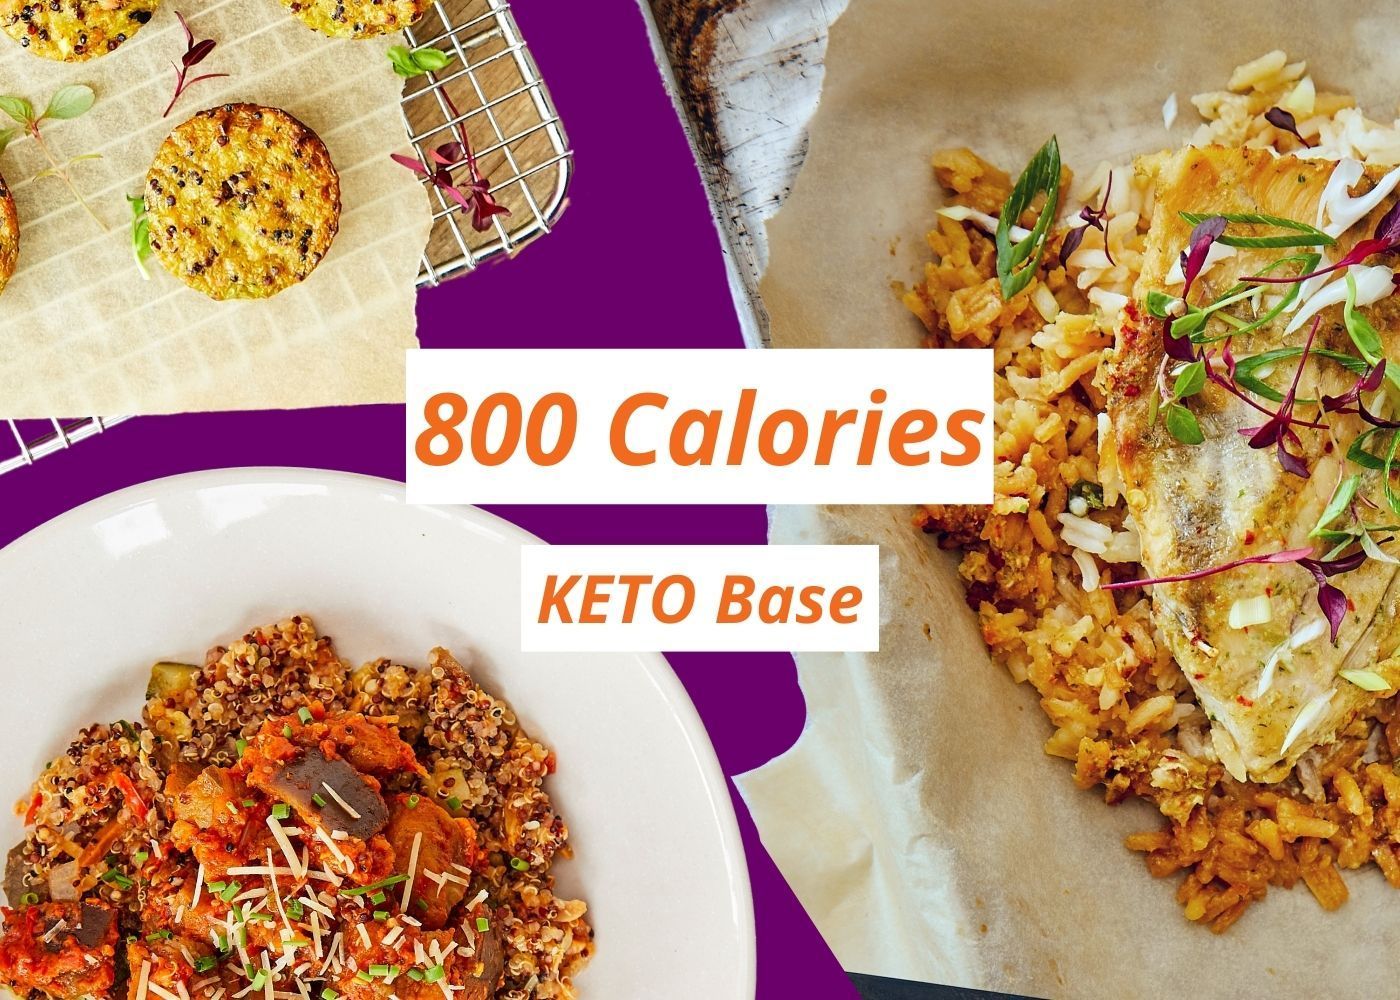 800 Calorie Keto - 7 Day - Plan 1 - Add Your Own Salad Greens